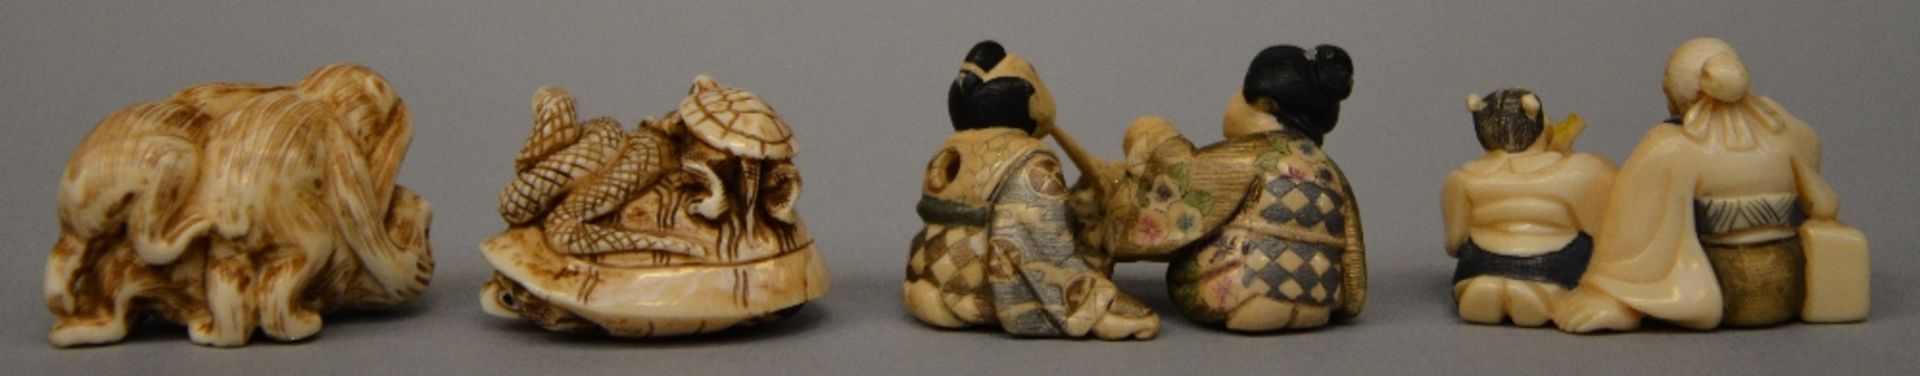 Various netsuke and little okimono, some scrimshaw decorated, Japan, late Meiji period or Interwar - Image 6 of 6